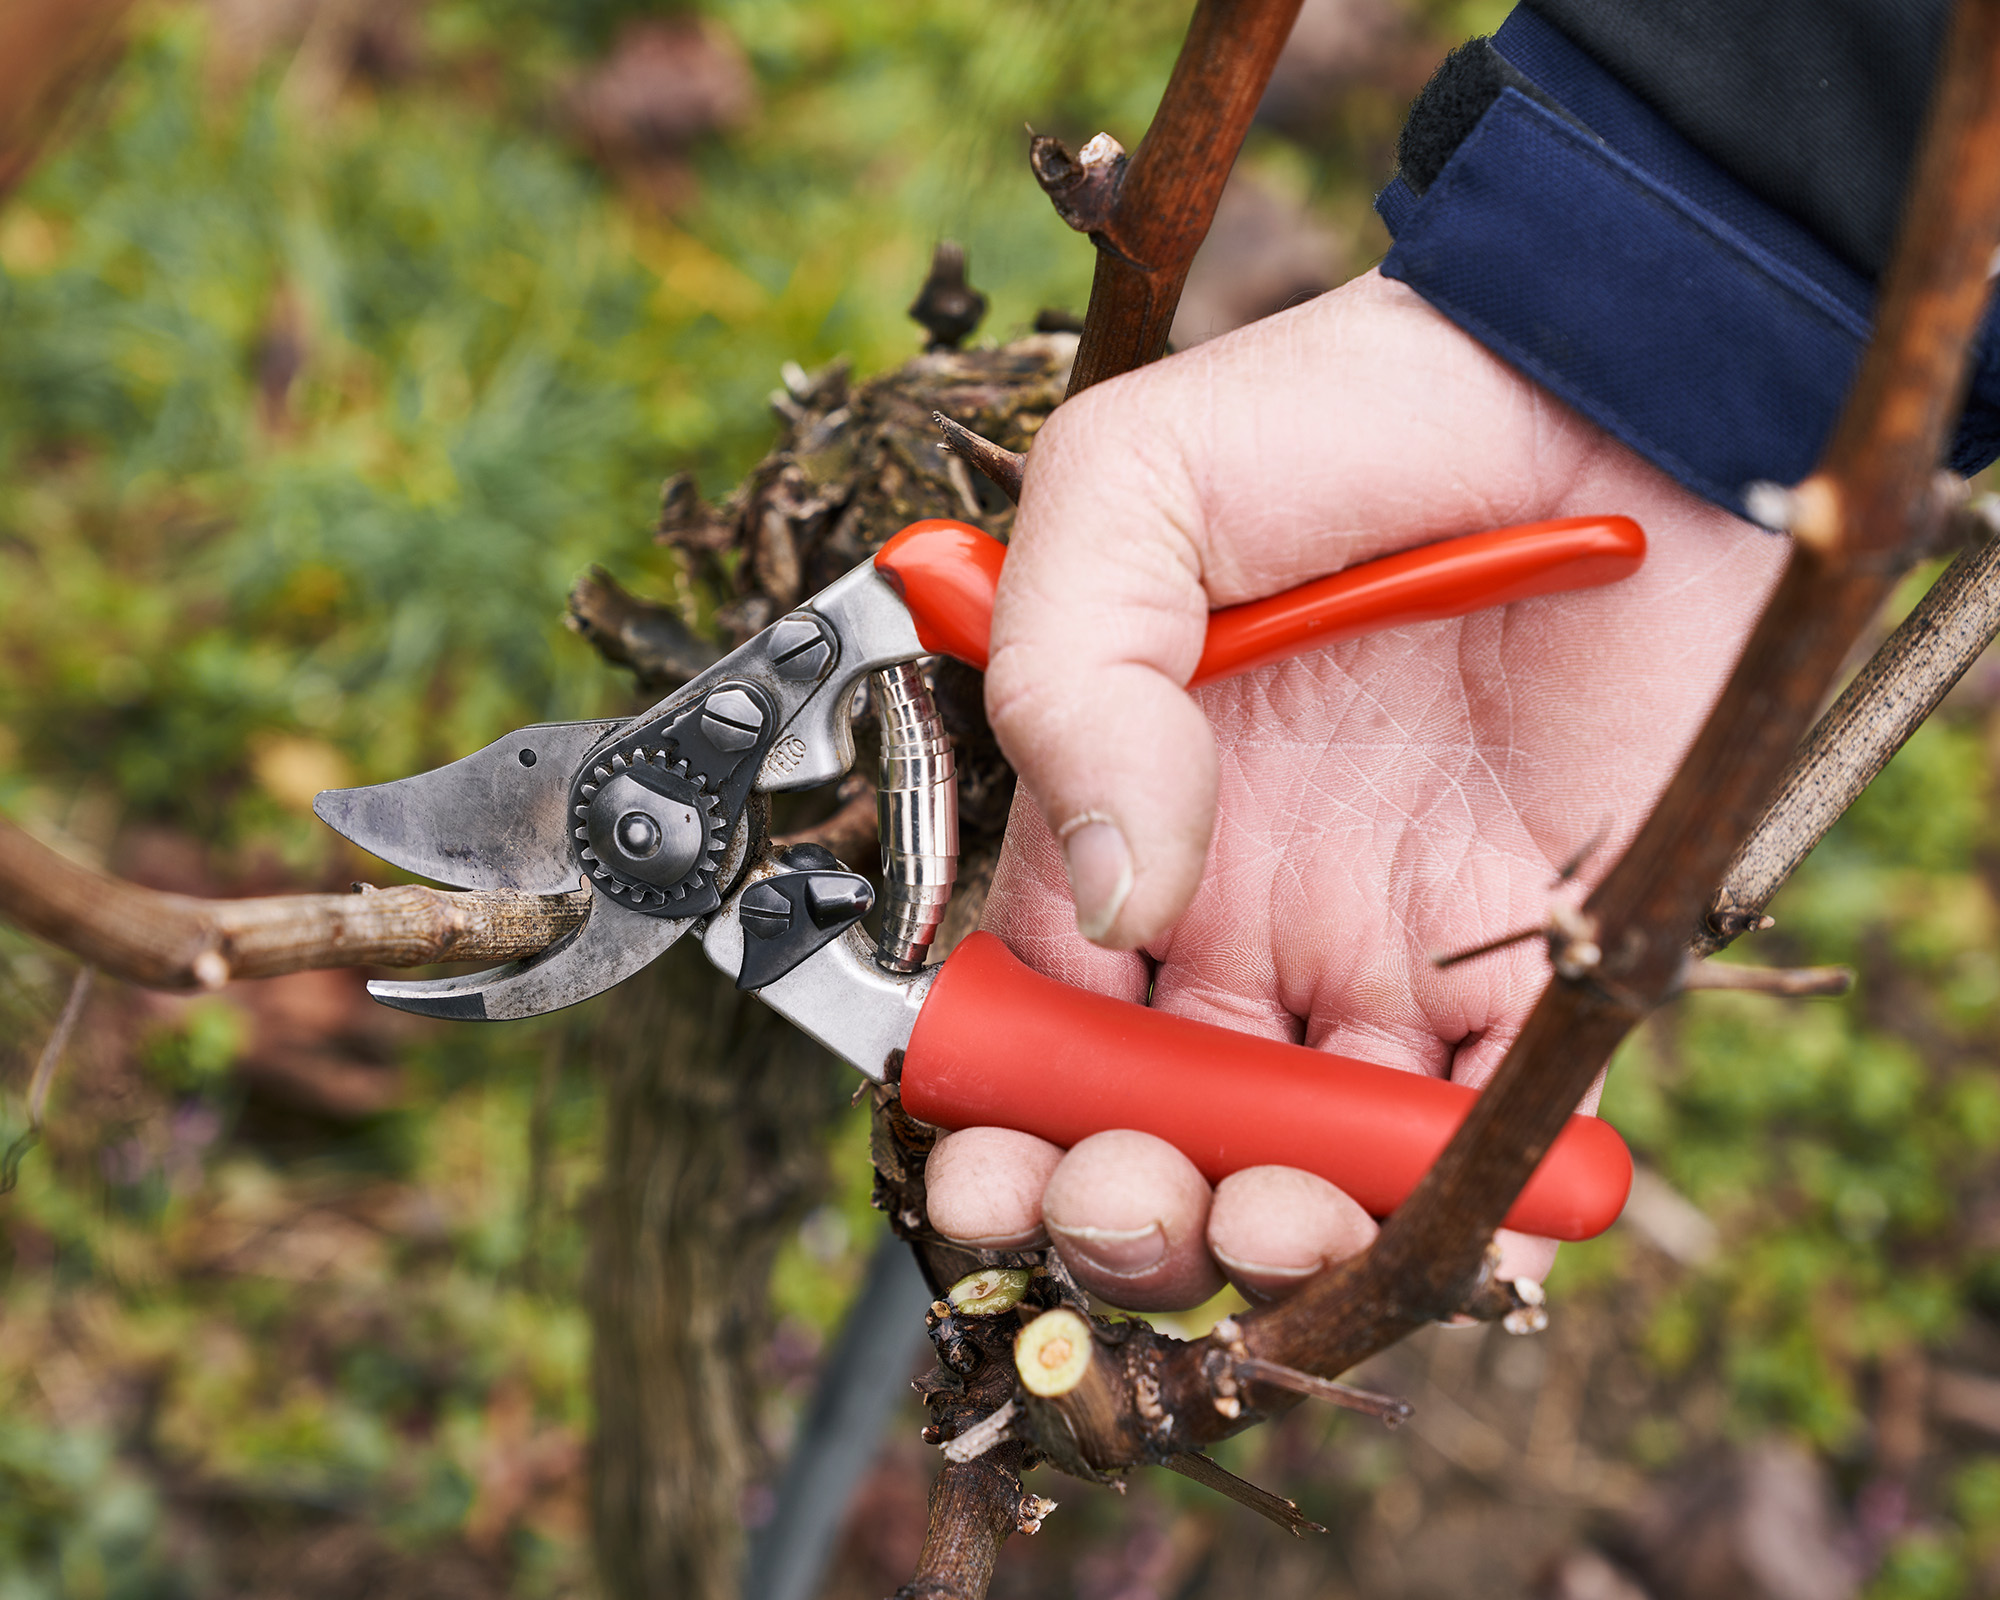 Felco 15 secateurs with rotating handle - designed for small hands